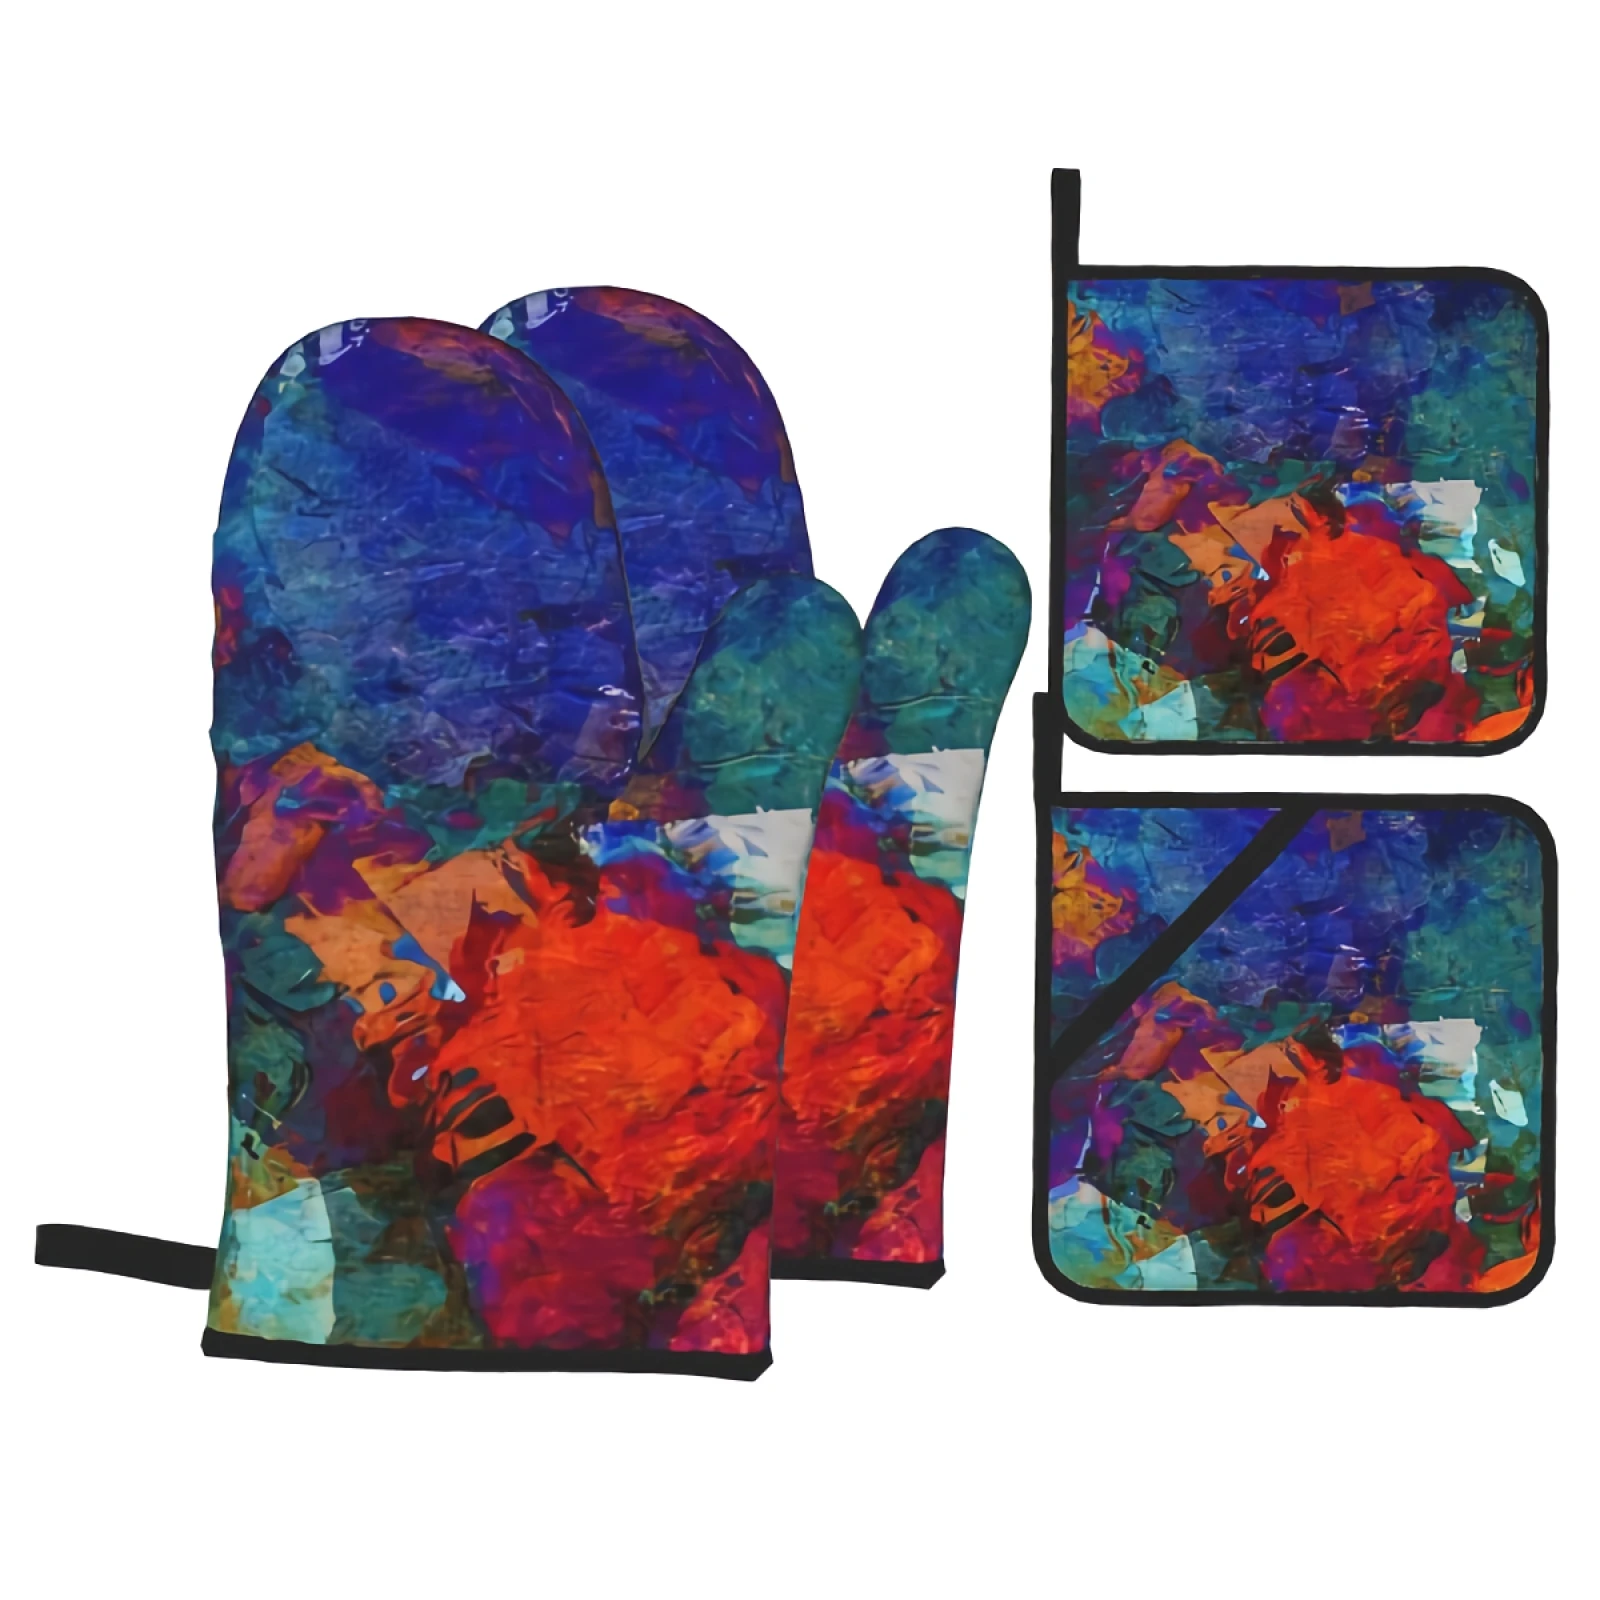 

Abstract Art Oven Mitts and Pot Holders Sets Funny Printed Oven Gloves for Safe BBQ Cooking Baking Grilling Set of 4